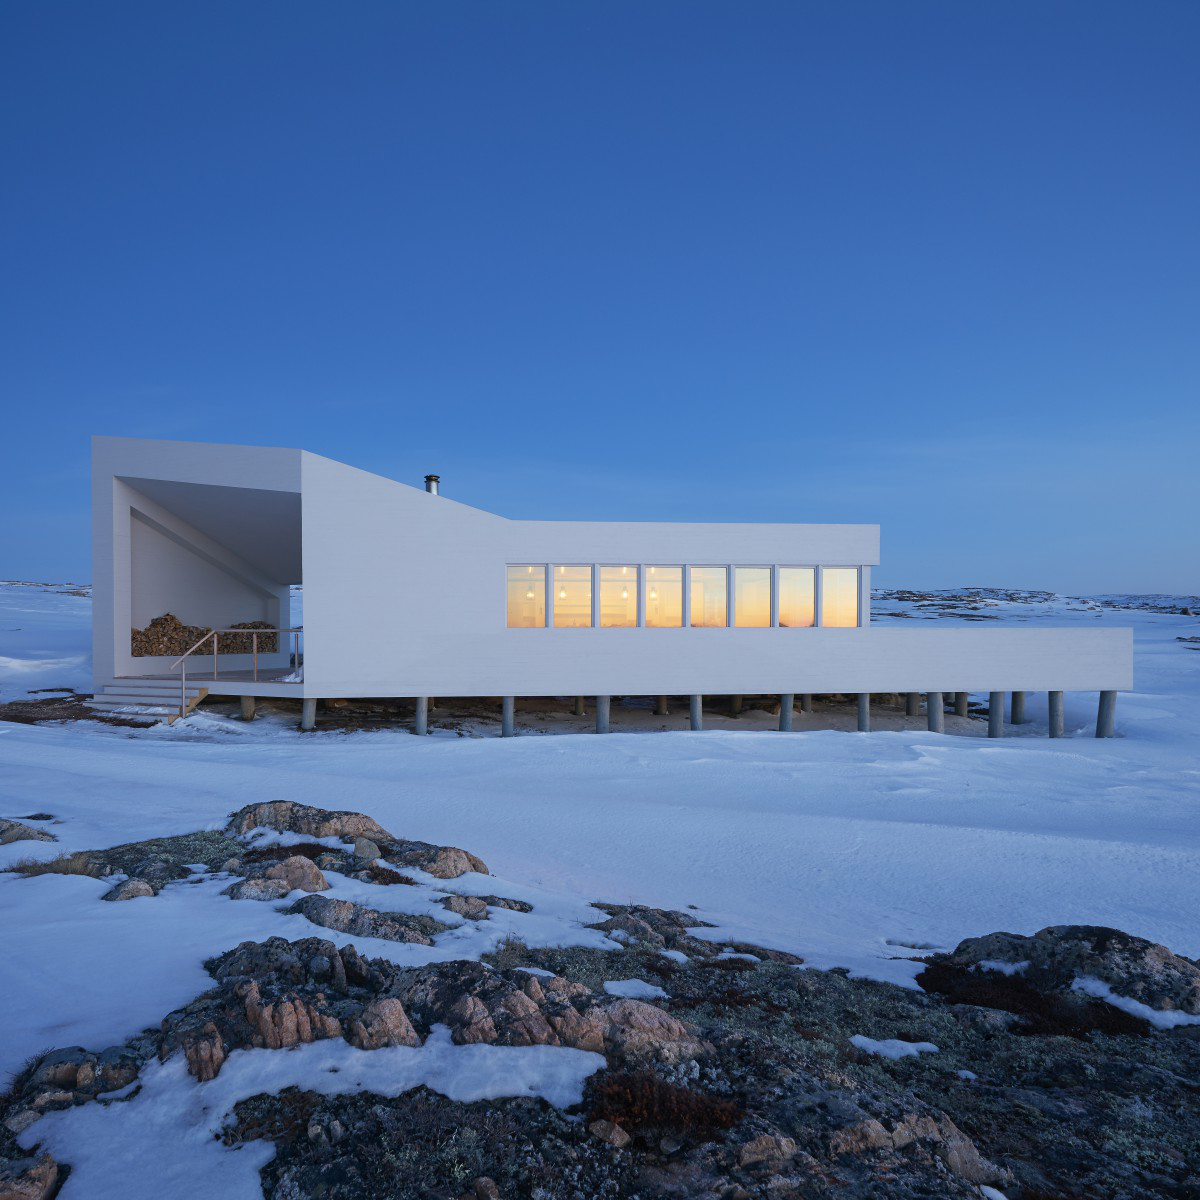 Fogo Island Shed: A Harmonious Blend of Tradition and Innovation